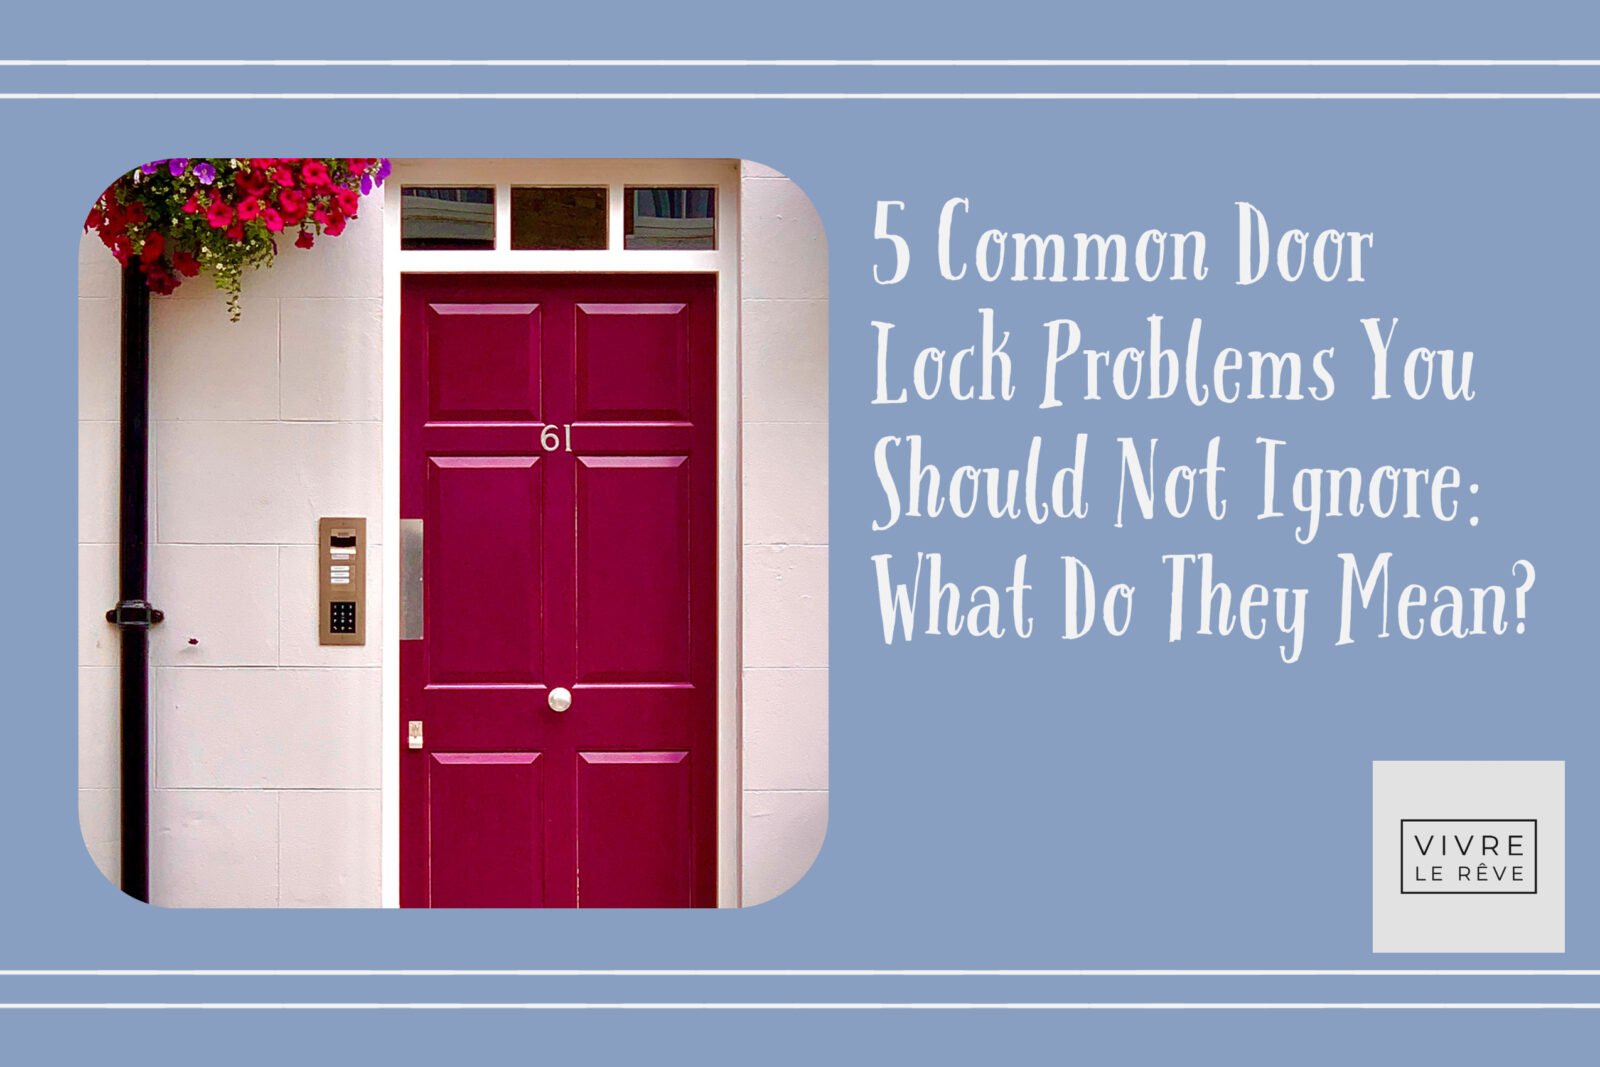 5 Common Door Lock Problems You Should Not Ignore: What Do They Mean?